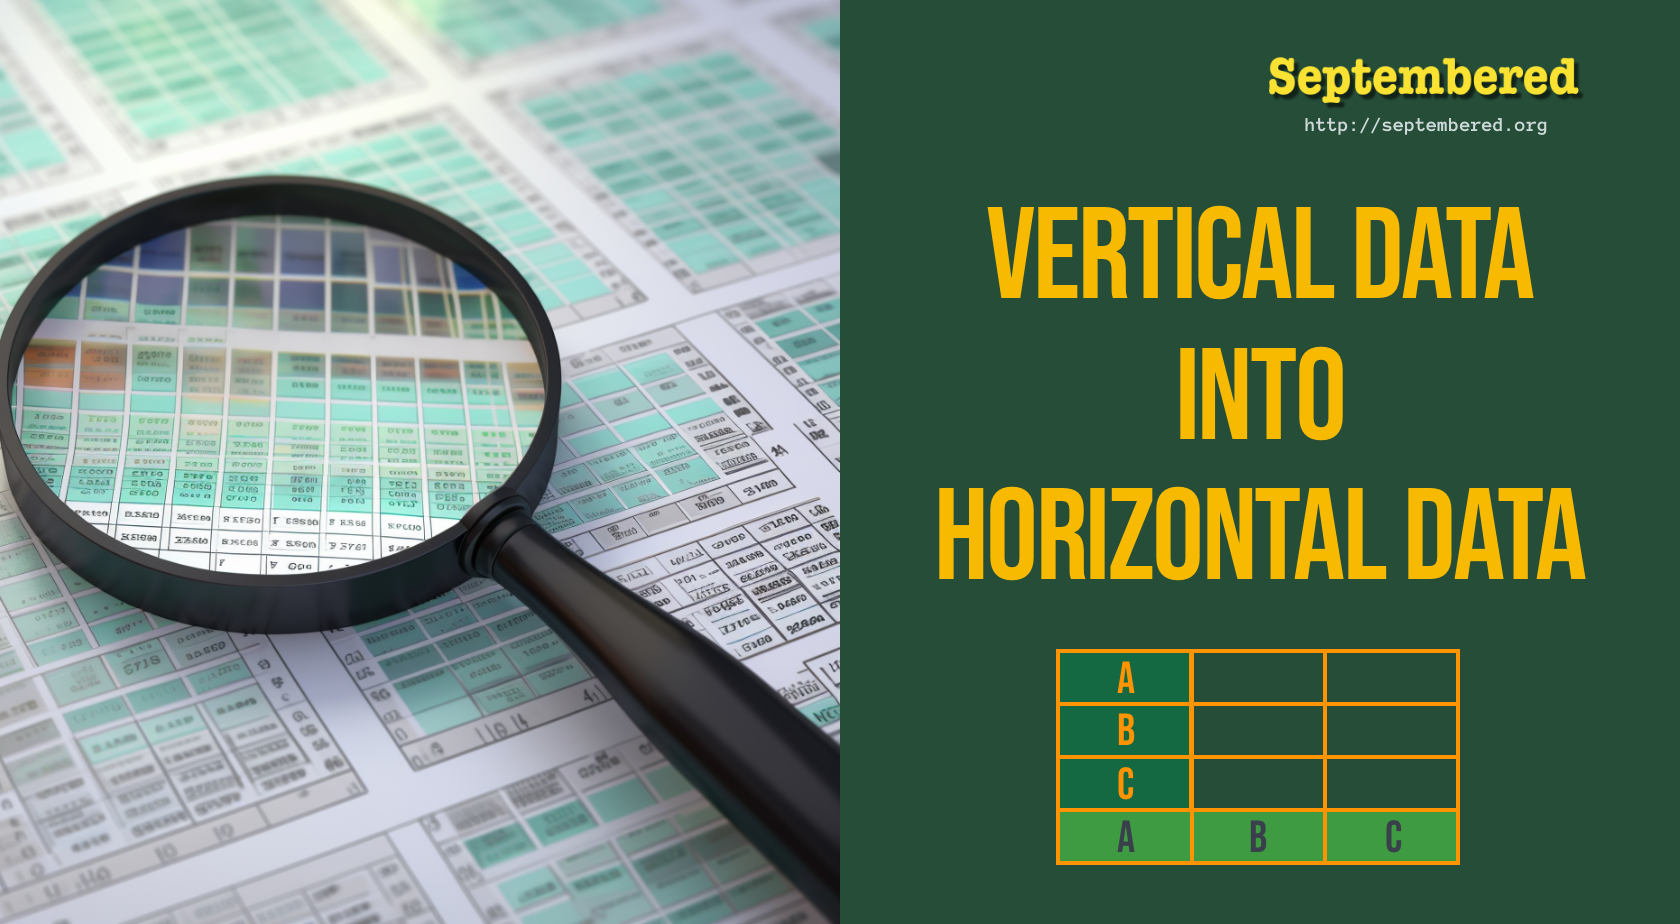 A picture of a magnifying glass on a spreadsheet page, reflecting data in a vertical line. The title text reads 'Vertical Data into Horizontal Data' with a graphic of a spreadsheet showing letters A, B, C in both vertical and horizontal orientation.